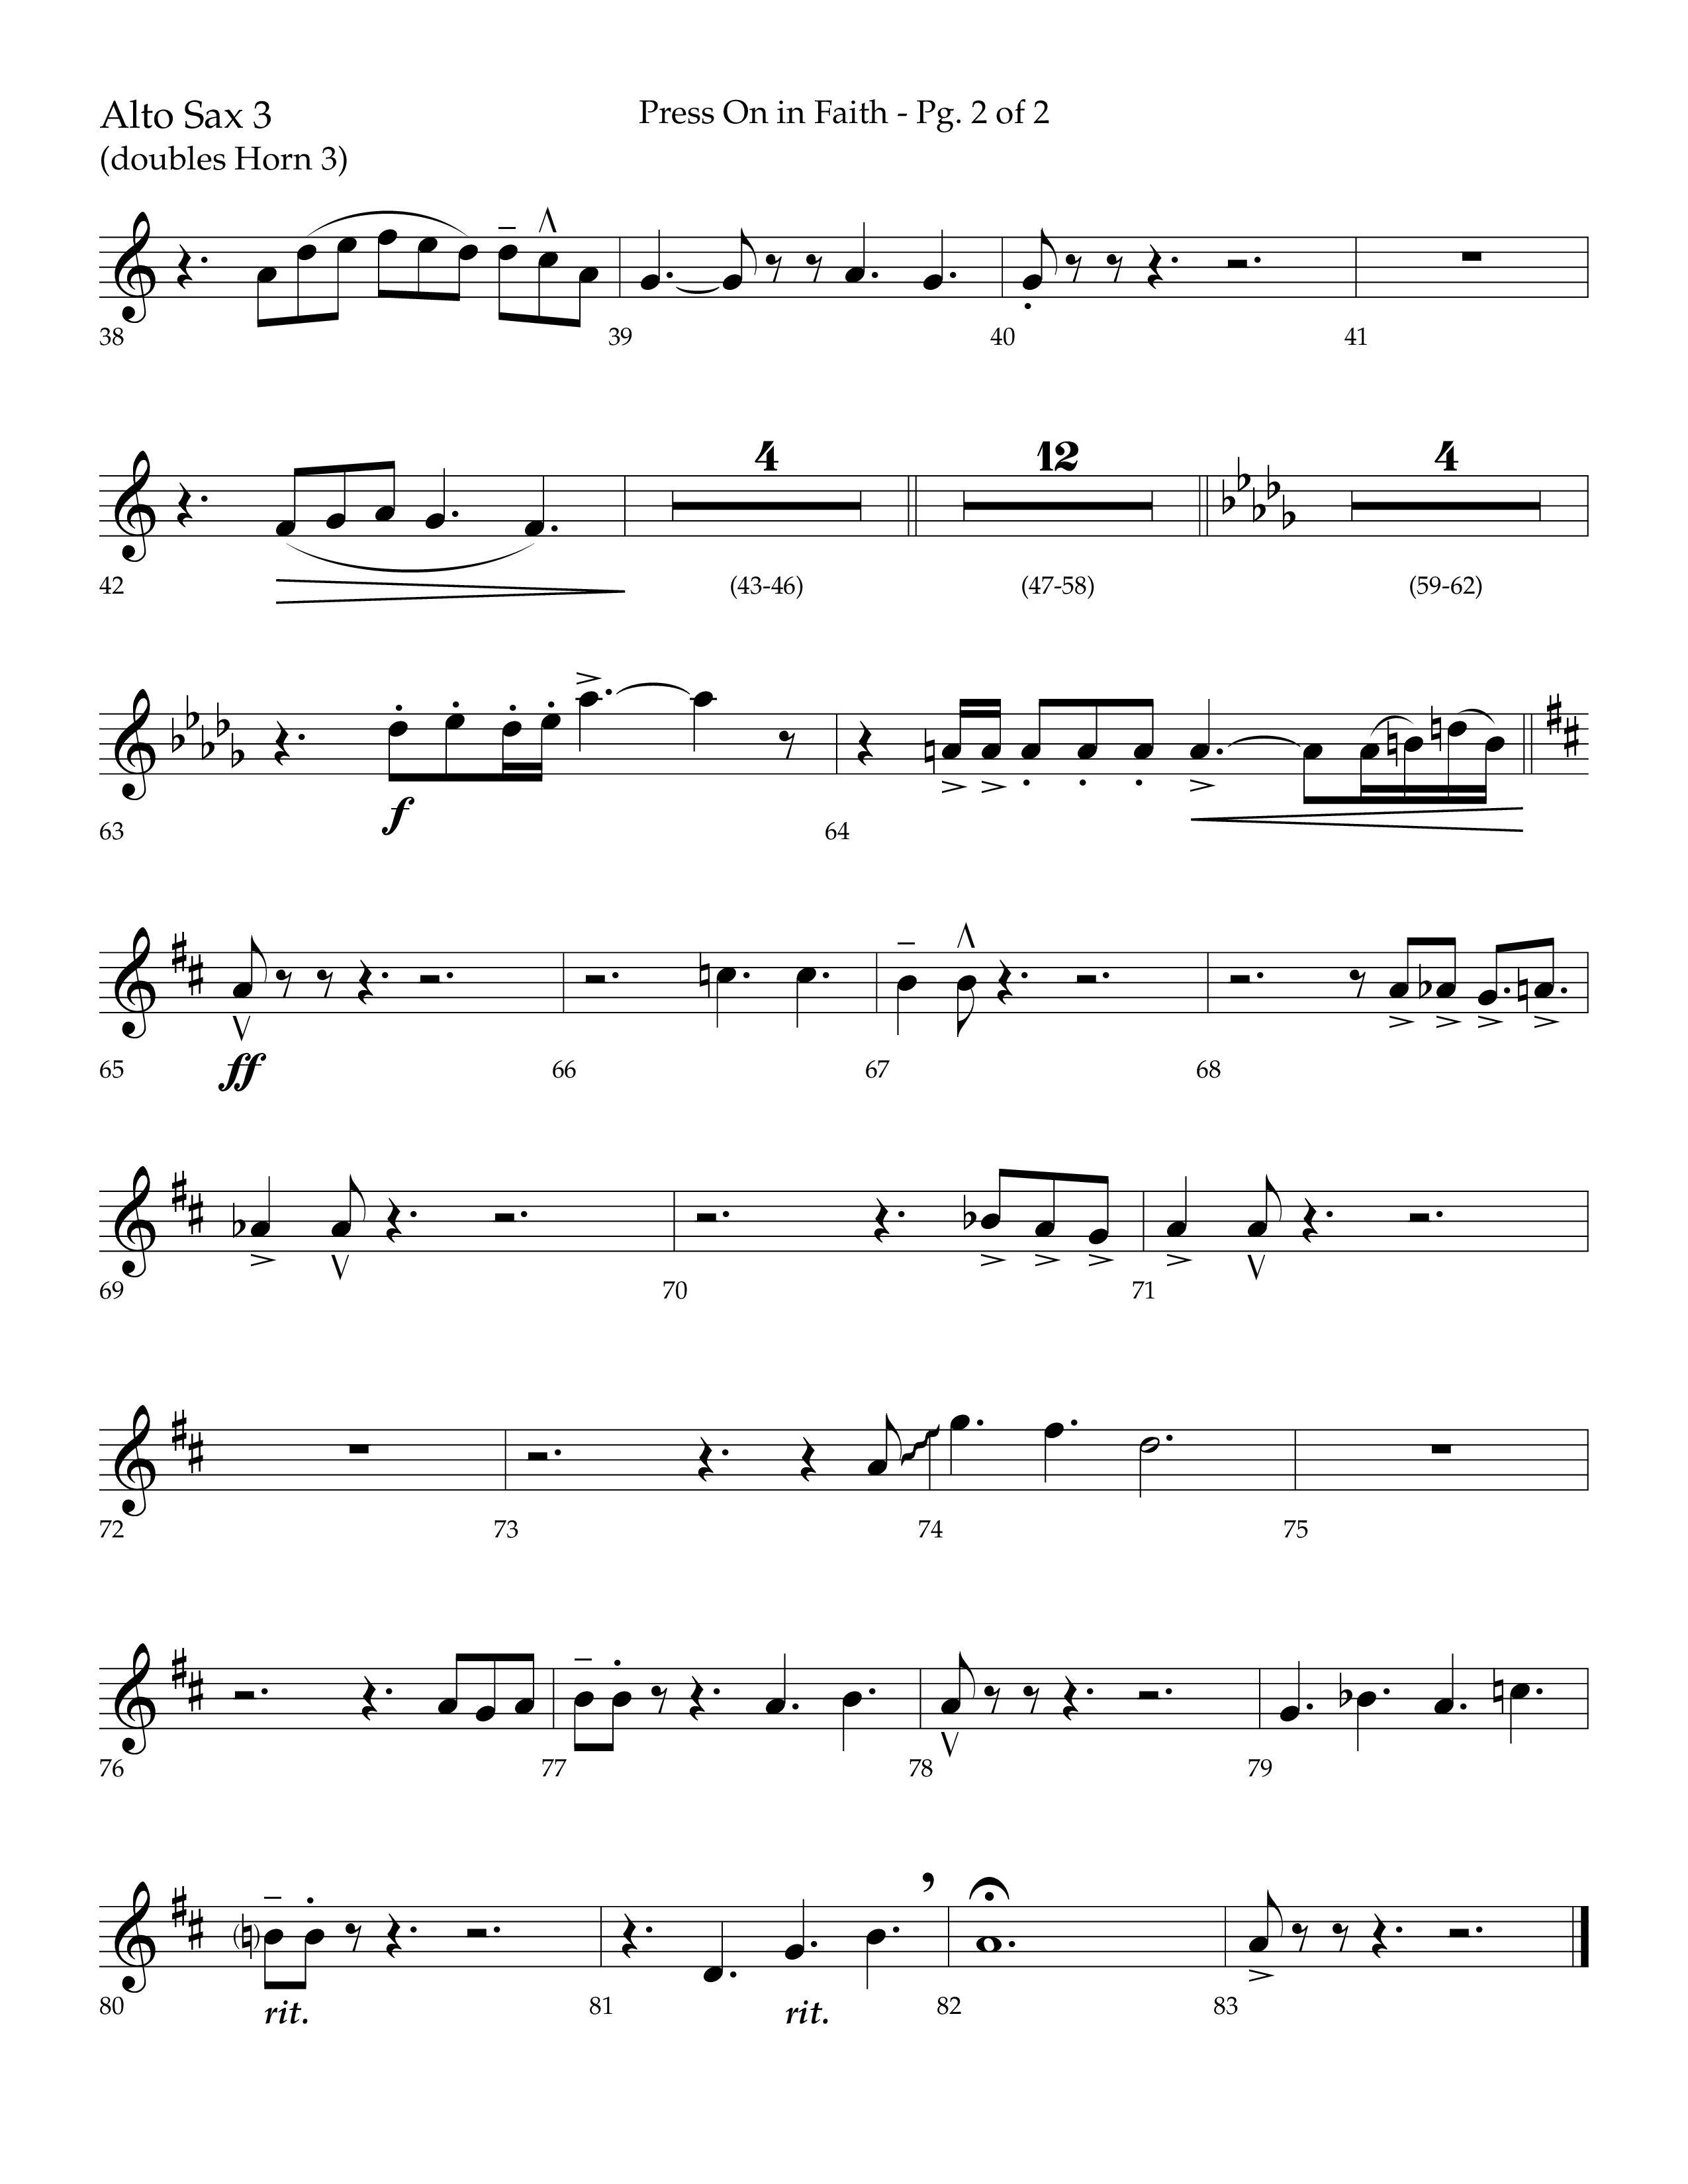 Press On In Faith with We’ve Come This Far By Faith Choral Anthem SATB Alto Sax (Lifeway Choral / Orch. Bradley Knight)